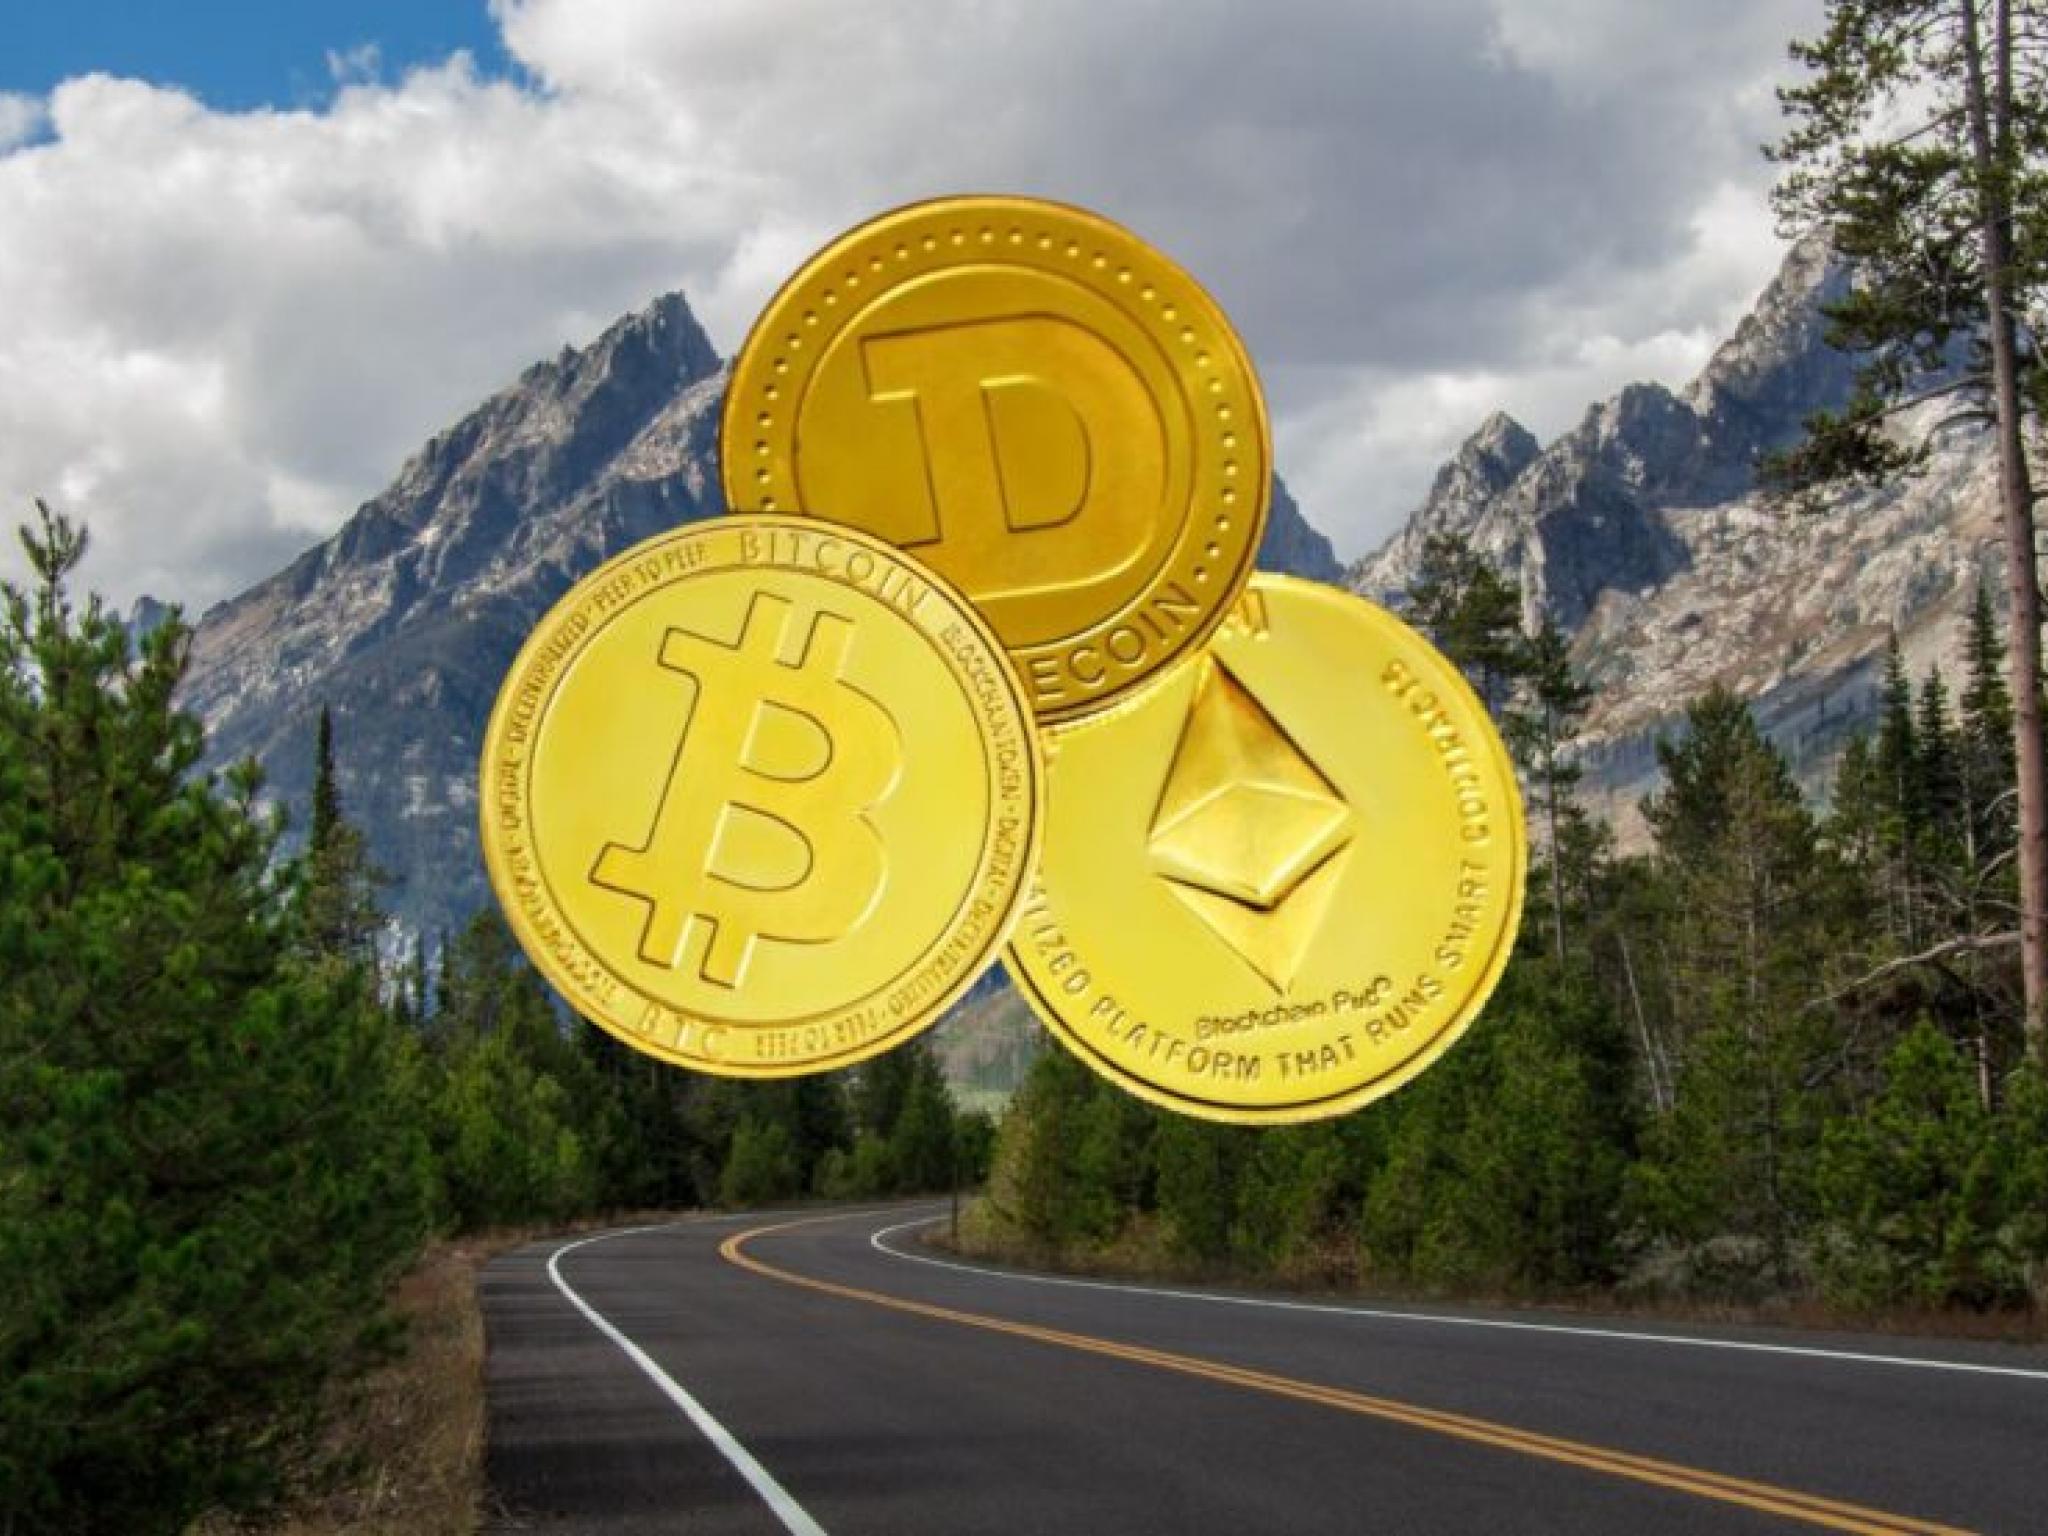  bitcoin-ethereum-dogecoin-struggle-as-mt-gox-repayments-begin-crypto-analyst-says-btc-could-drop-to-47000-from-here 